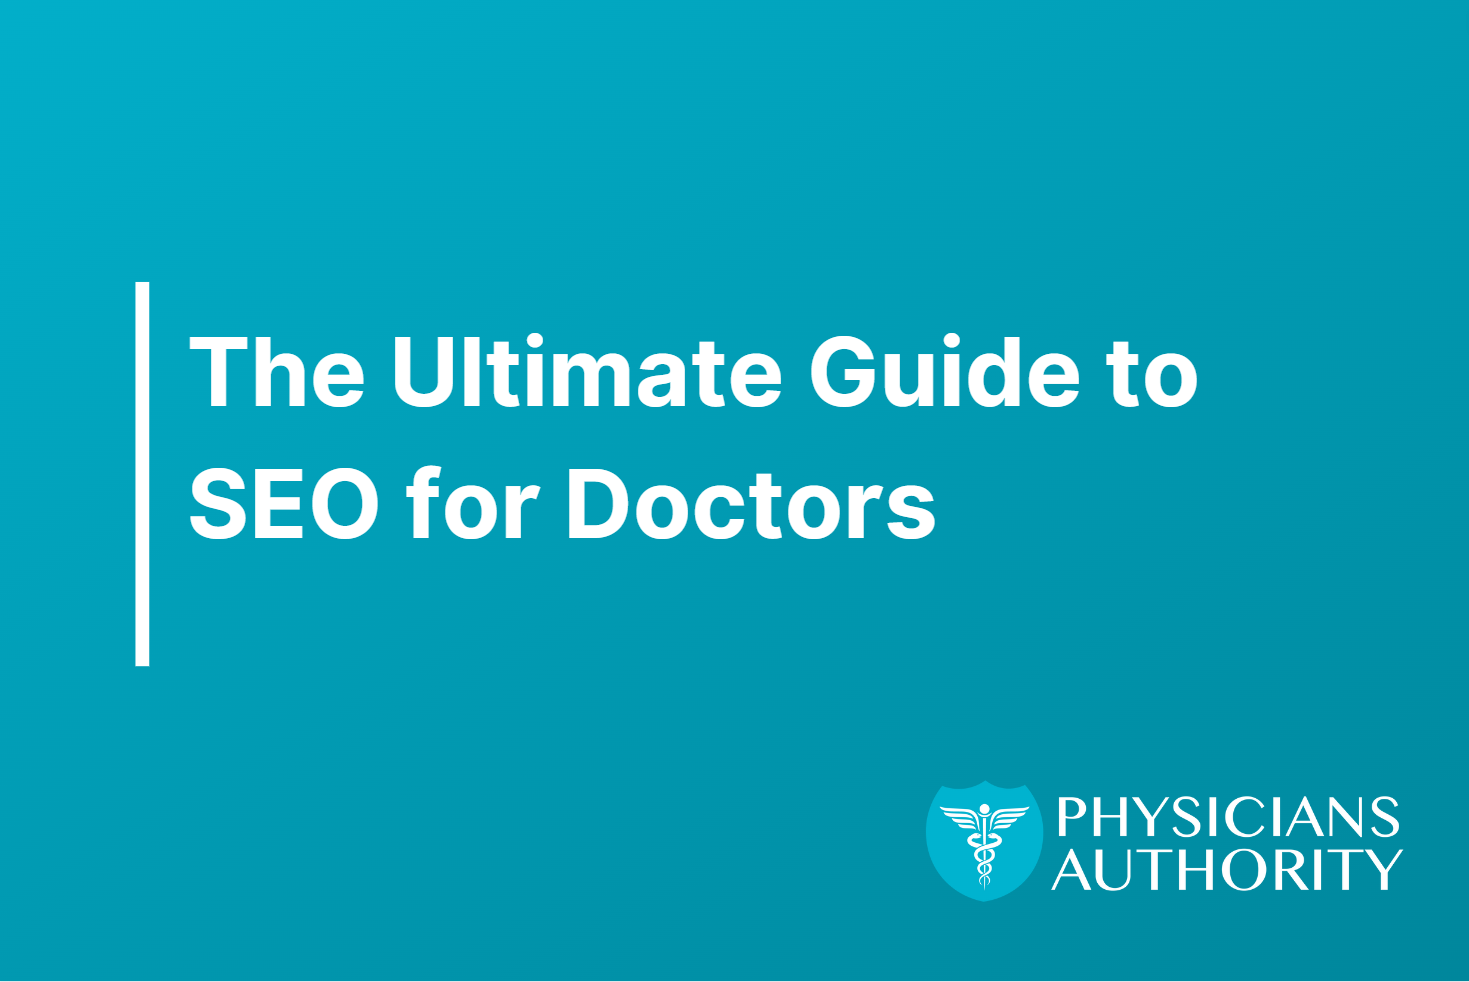 seo for doctors - physicians authority medical marketing agency